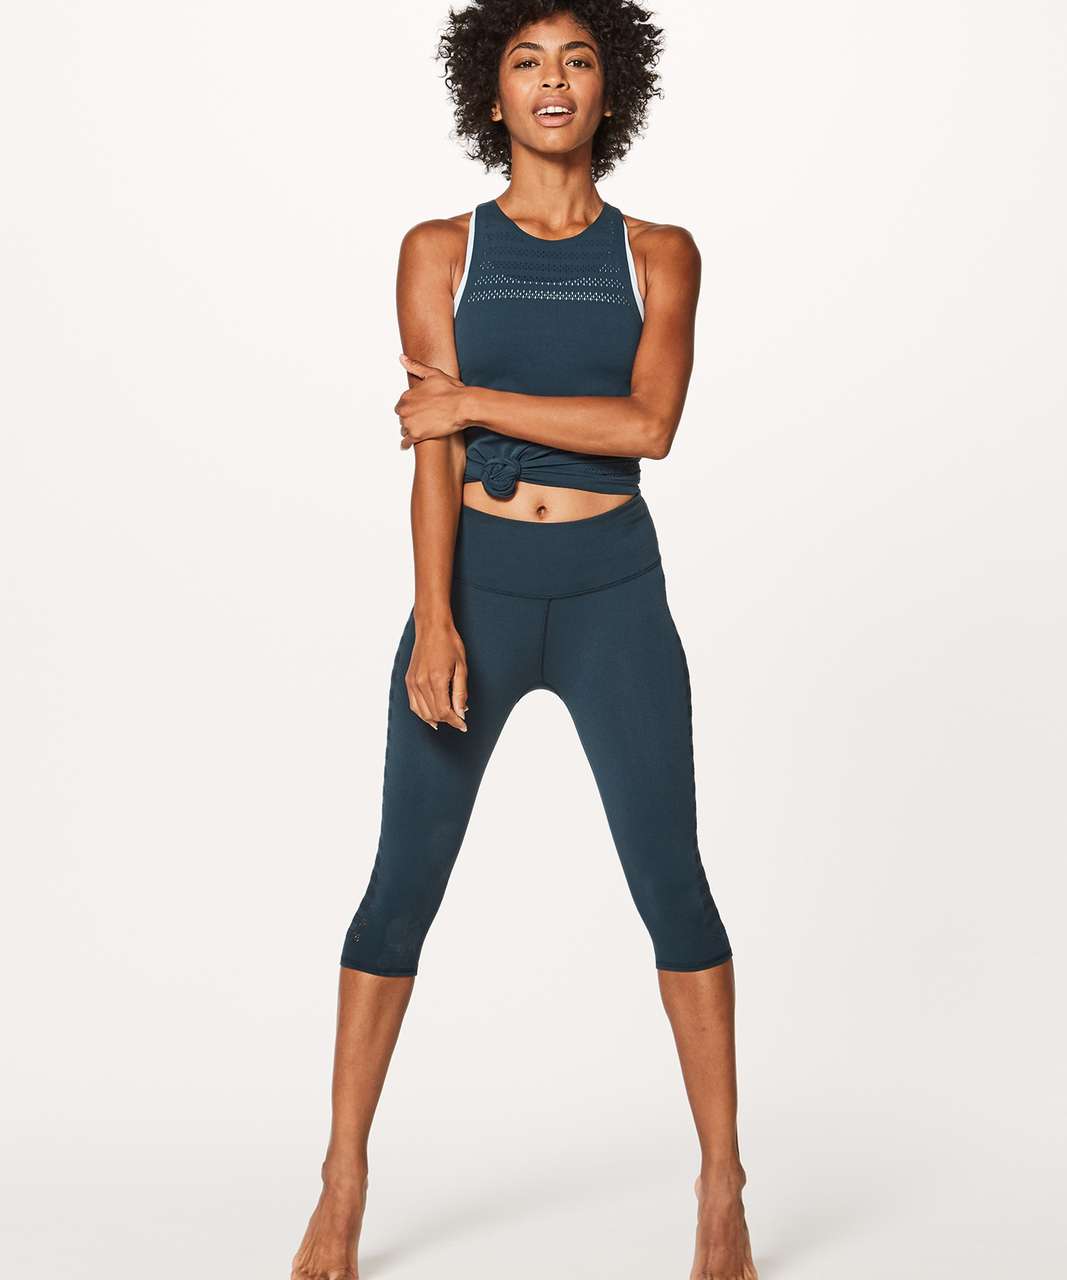 Lululemon Reveal Crop 15 Black Size XS - $51 - From Peggy